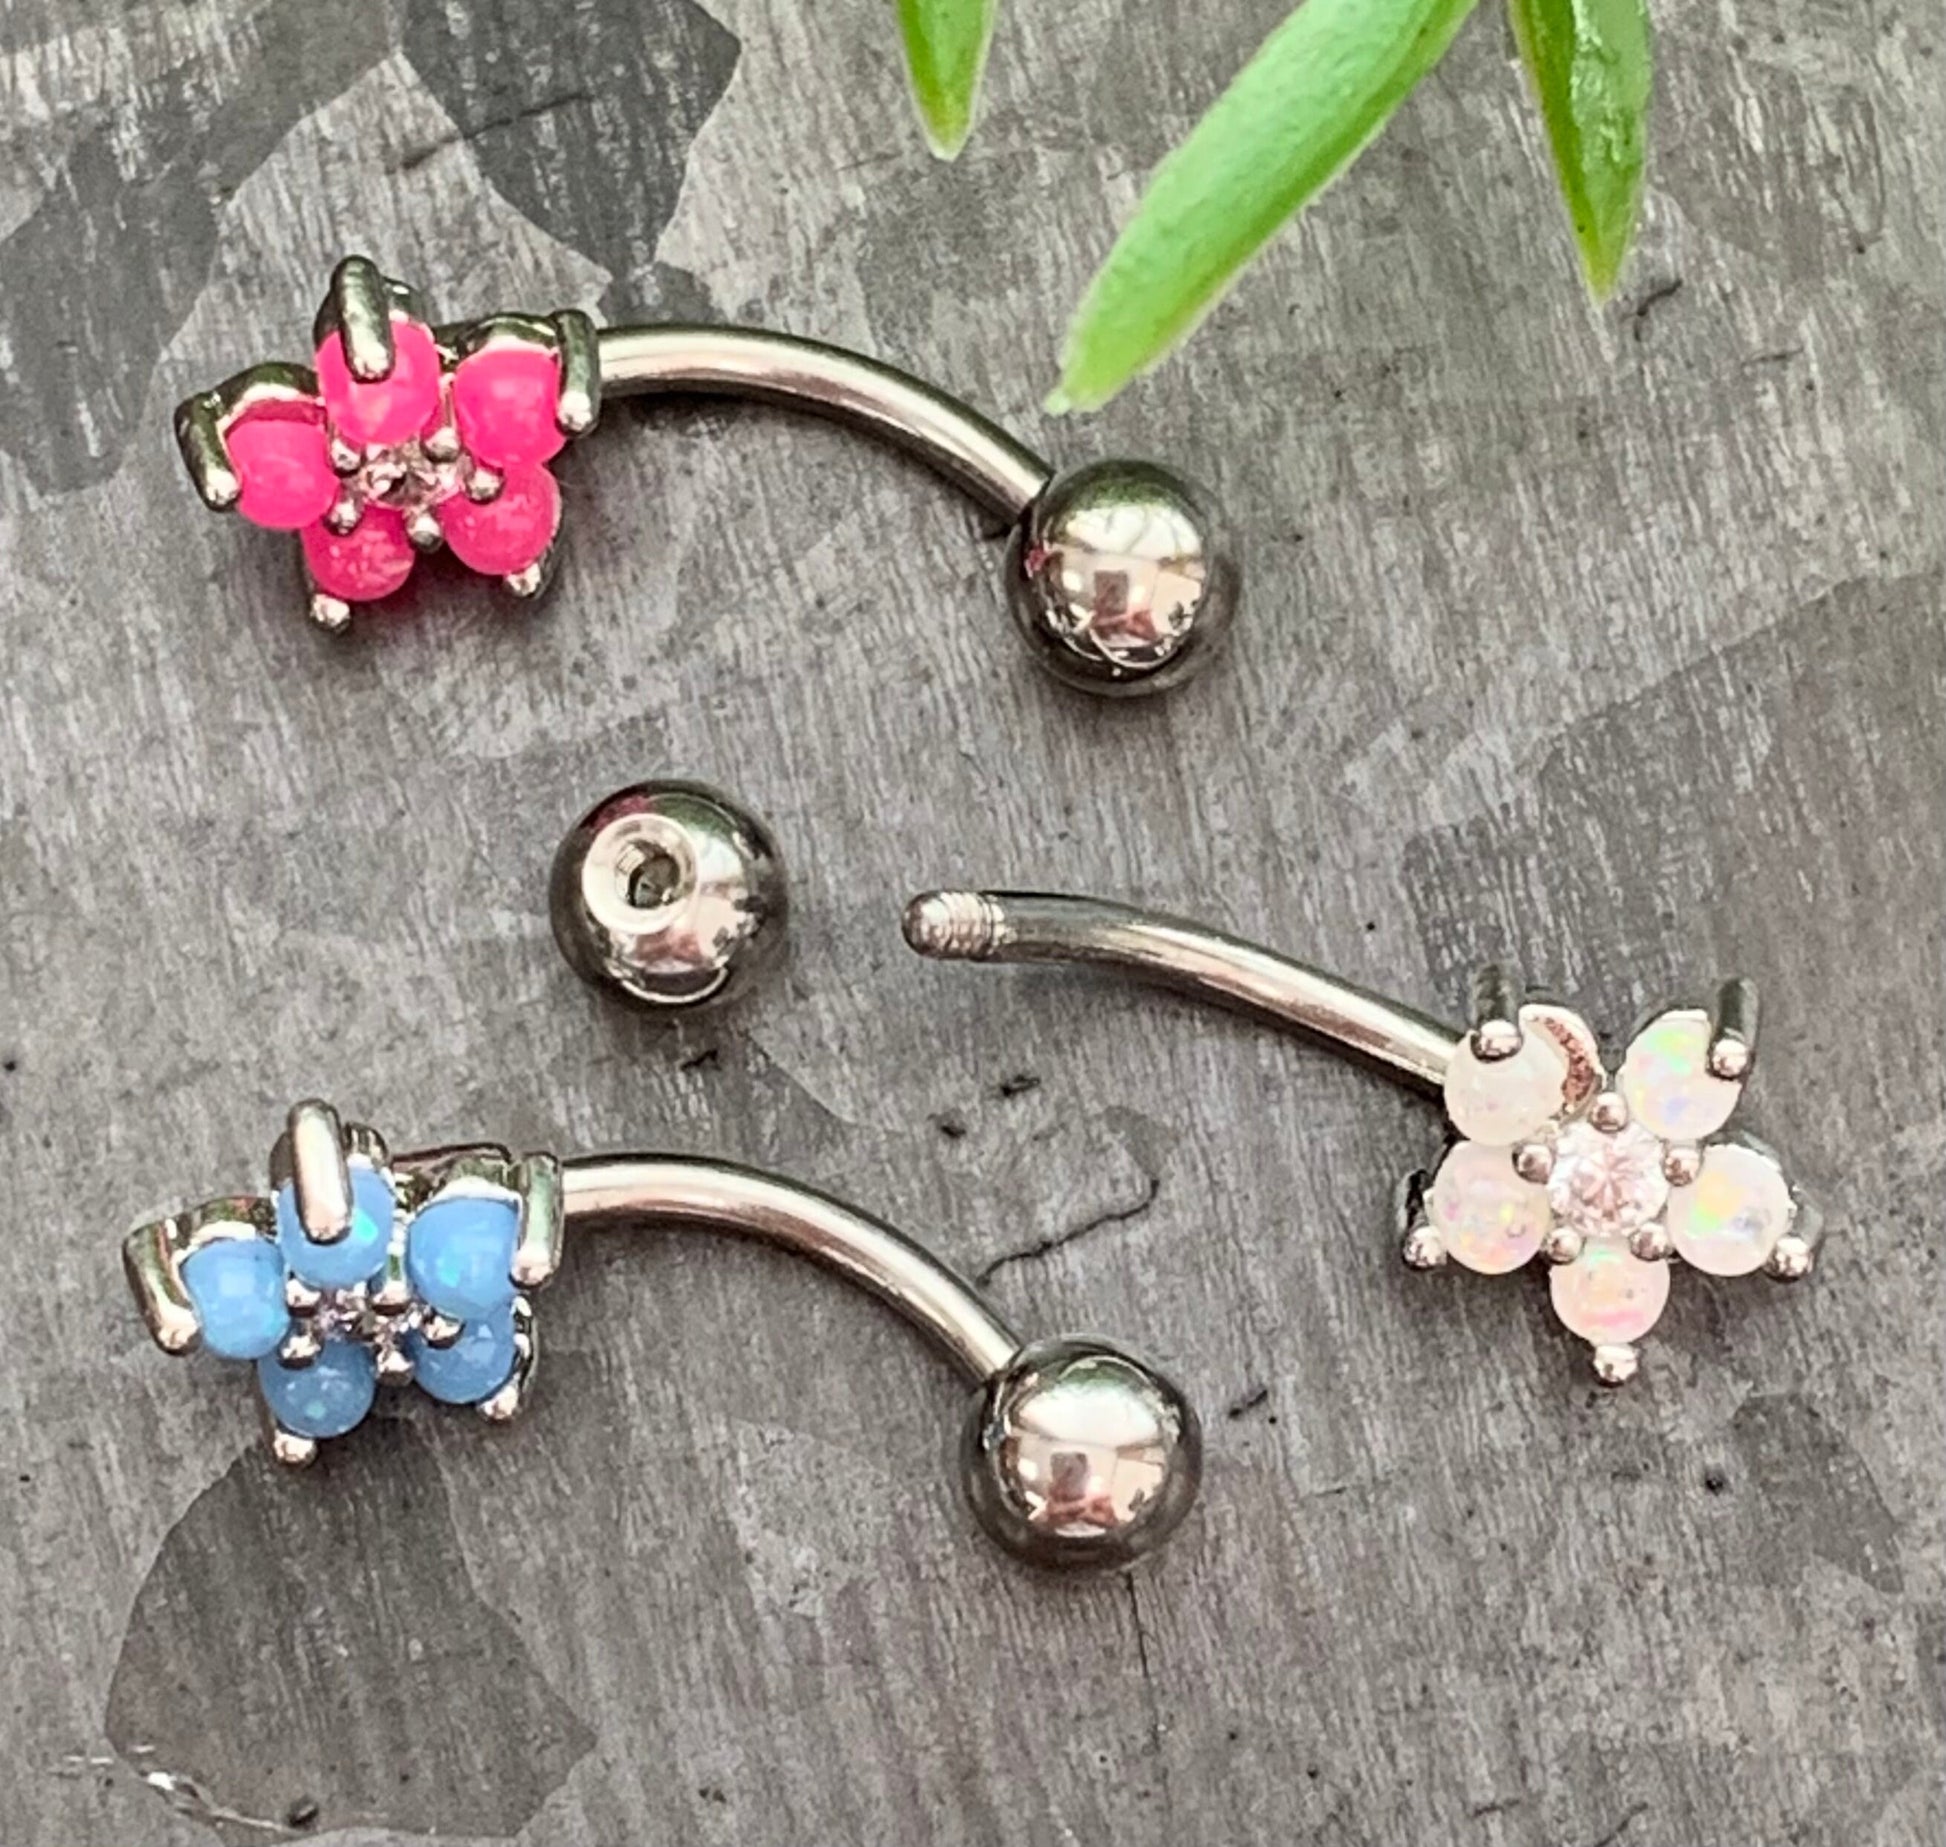 1 Piece Brilliant Opal Glitter Flower Curved Barbell Eyebrow Ring - 16g - Length 8mm - White, Blue and Pink Available!